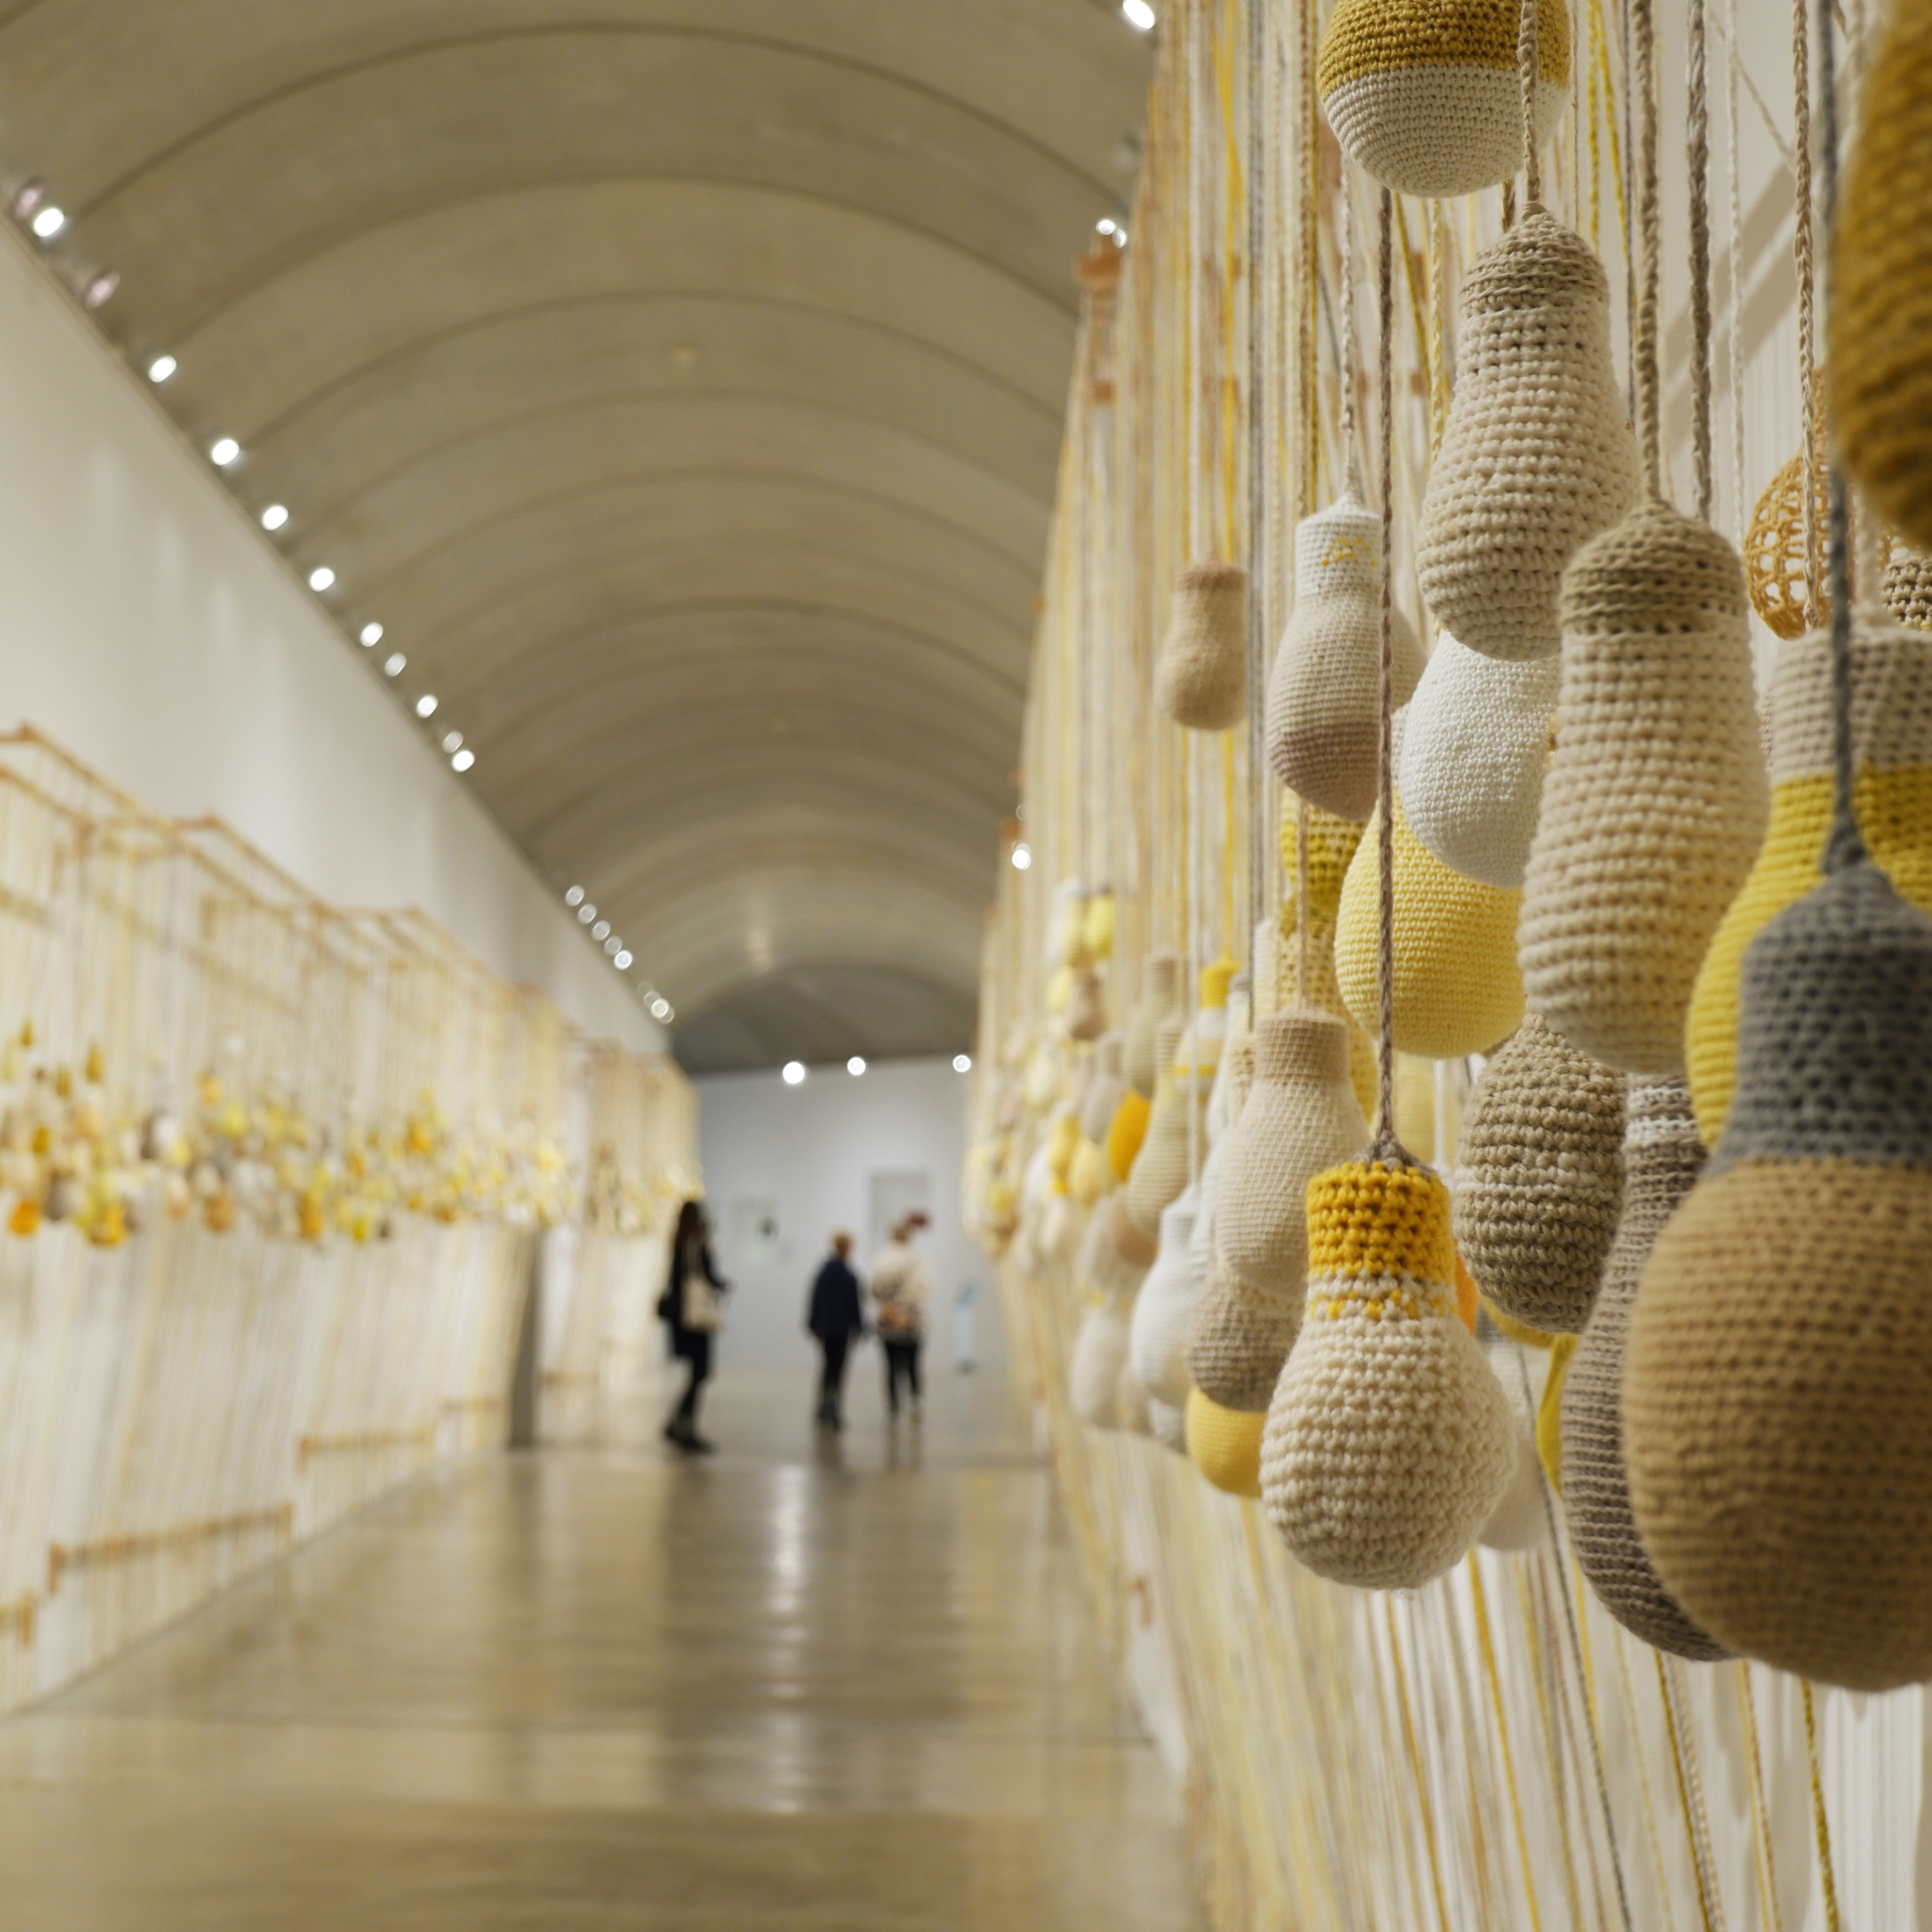 hundreds of crocheted light bulbs hanging along the walls of a gallery